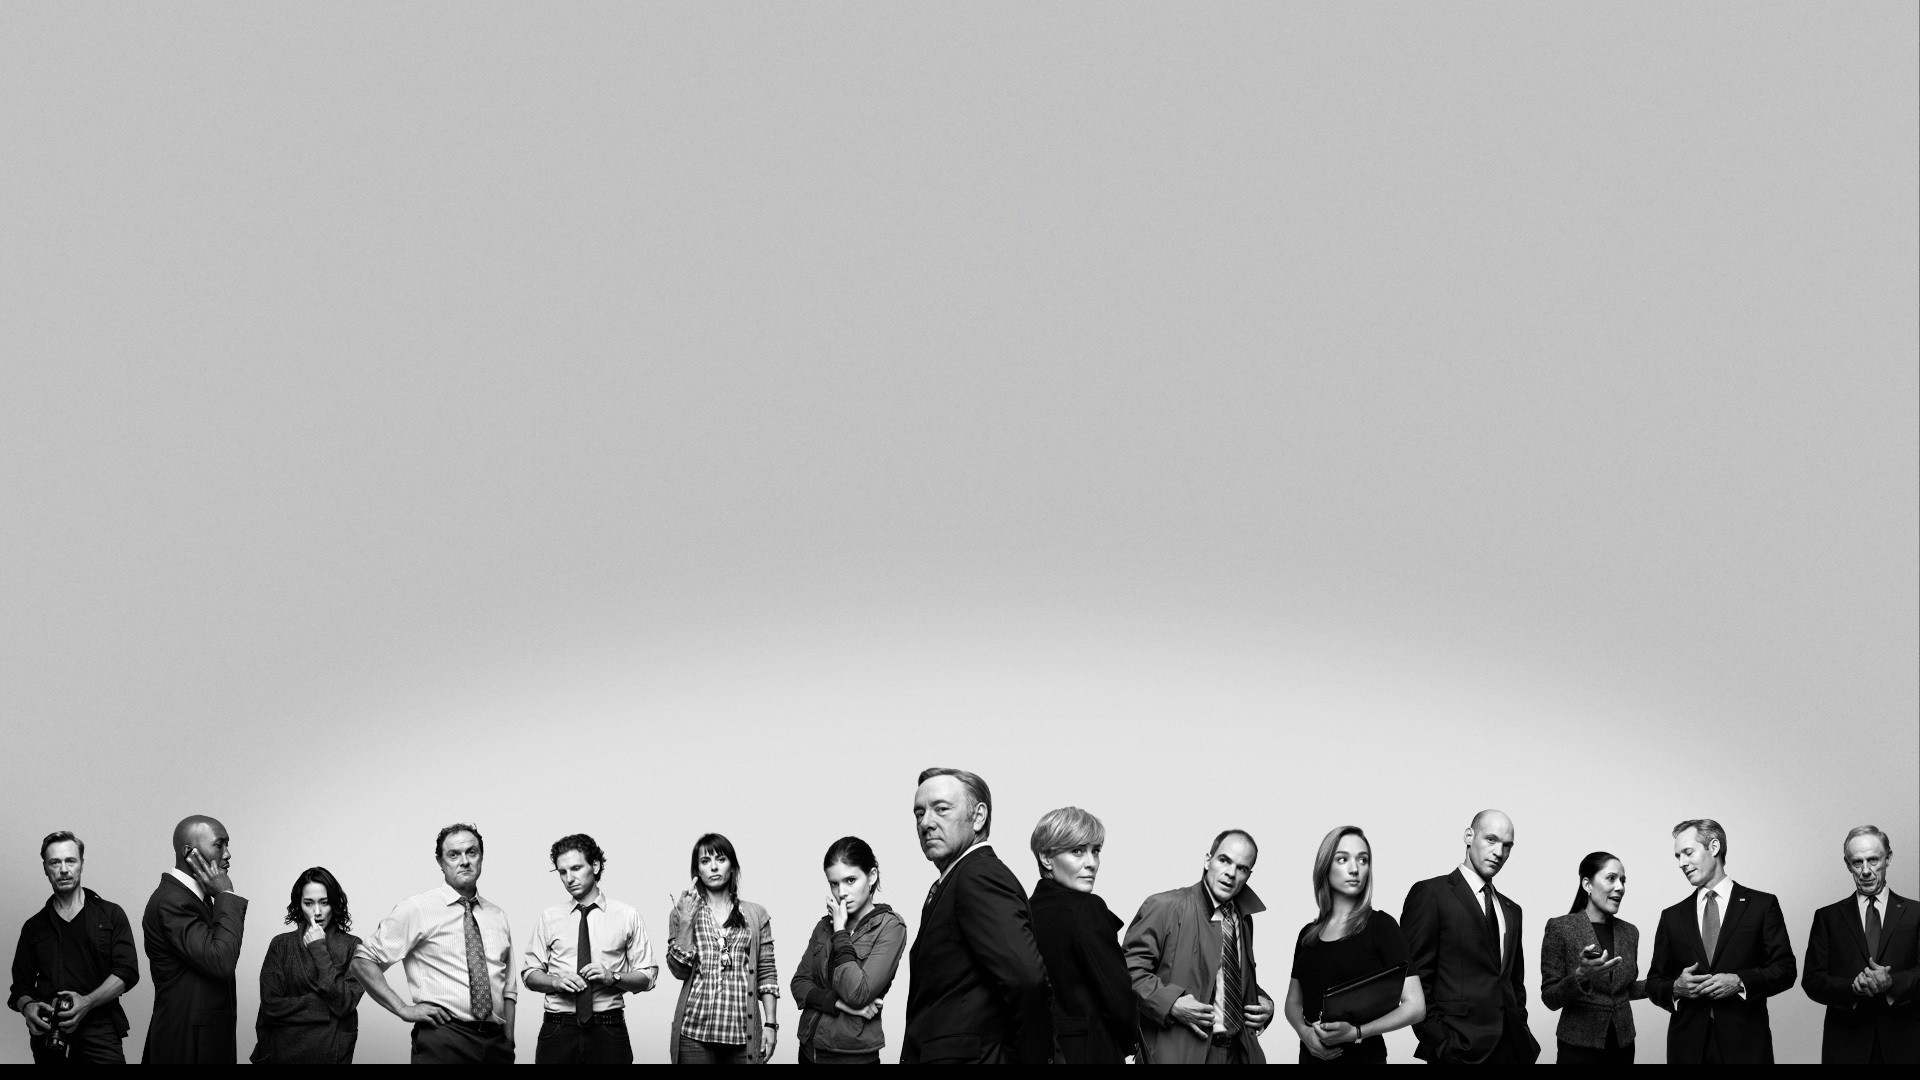 House Of Cards Backgrounds, Compatible - PC, Mobile, Gadgets| 1920x1080 px